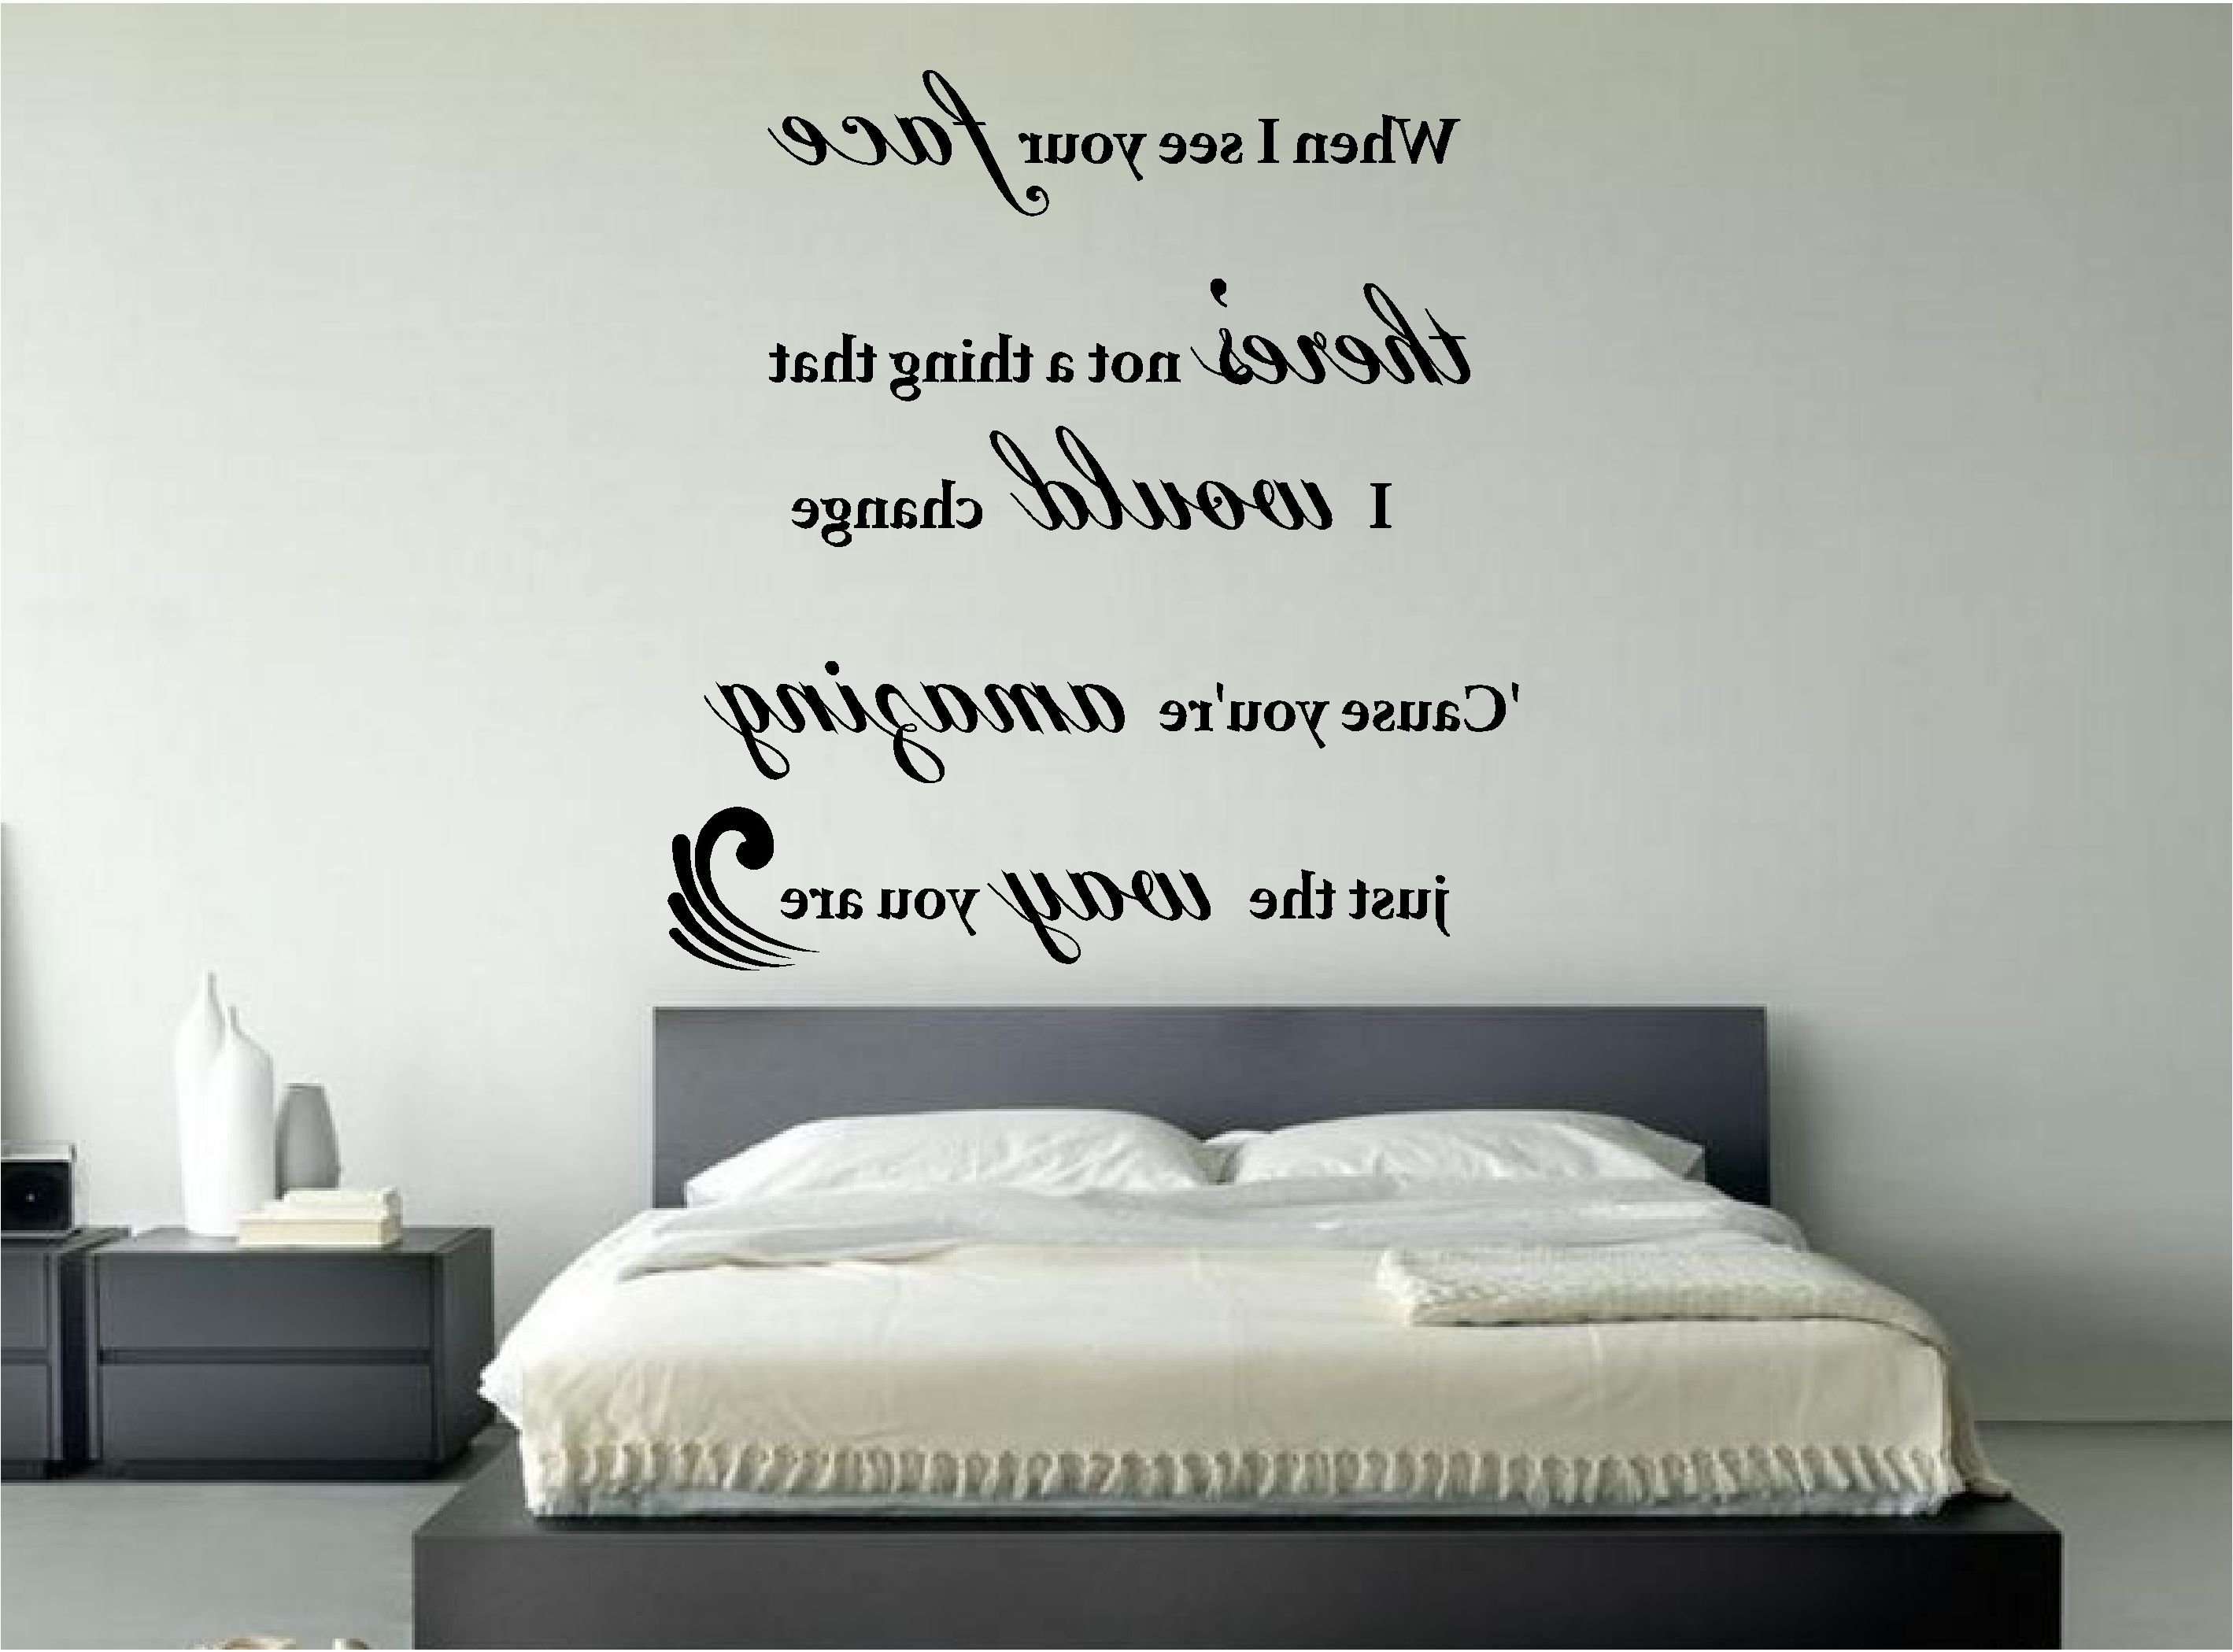 Music Lyrics Wall Art With Preferred Bedroom : Bedroom Amazing Wall Decal Quotes For Decorating Ideas (View 6 of 15)